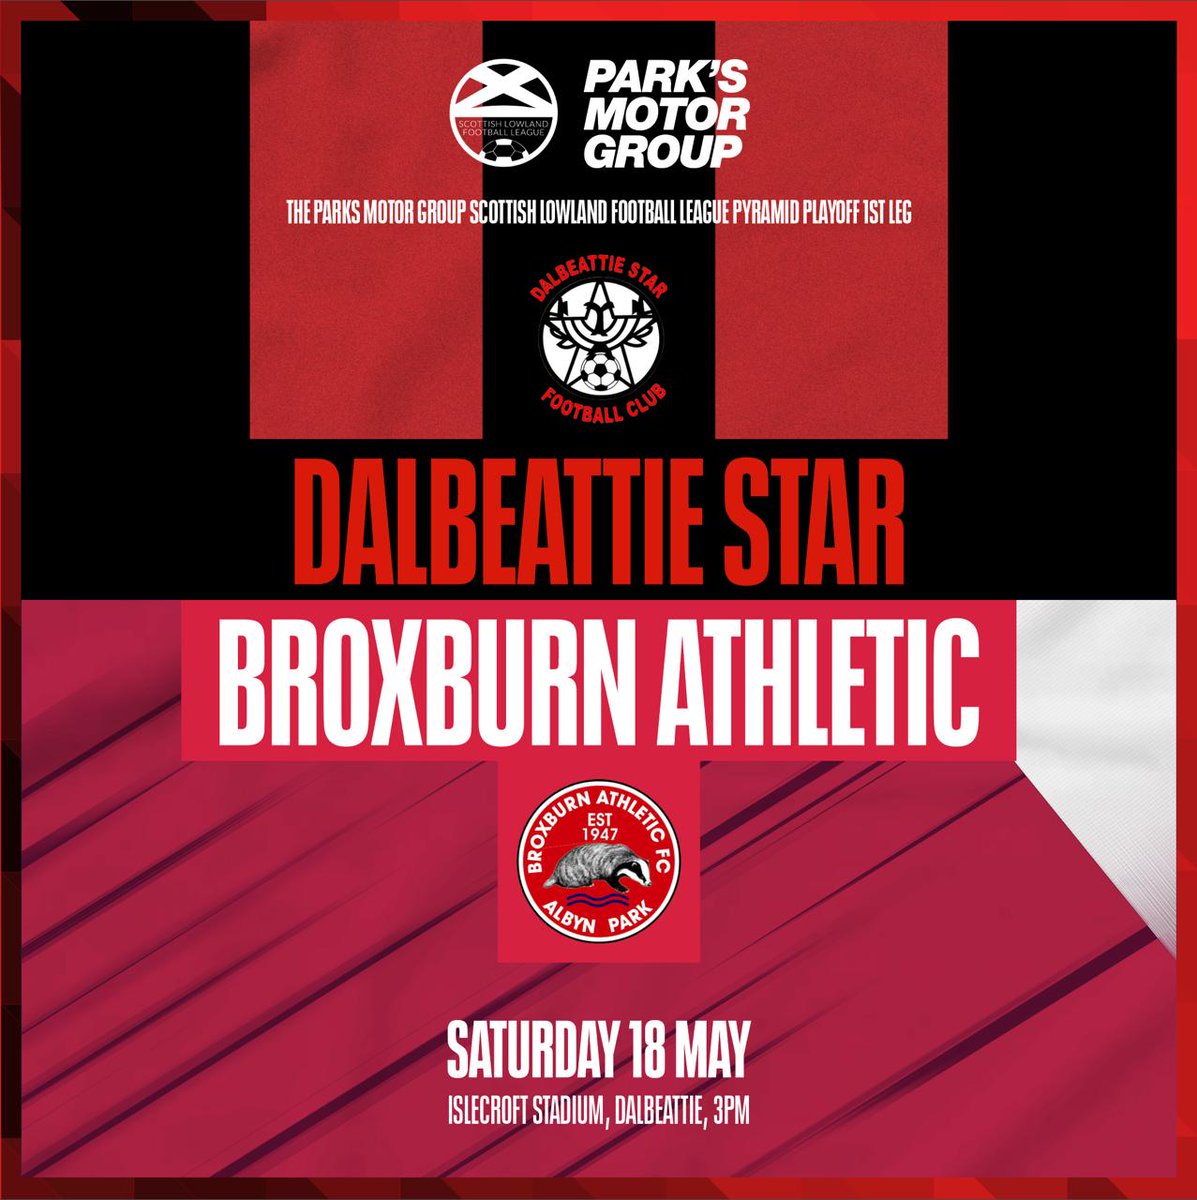 𝑳𝒐𝒘𝒍𝒂𝒏𝒅 𝑳𝒆𝒂𝒈𝒖𝒆 𝑷𝒍𝒂𝒚-𝑶𝒇𝒇 𝑭𝒊𝒓𝒔𝒕 𝑳𝒆𝒈 @dalbeattiestar host @BroxburnAthFC in the First Leg of the Lowland League Play-Off, this Saturday at Islecroft 📈